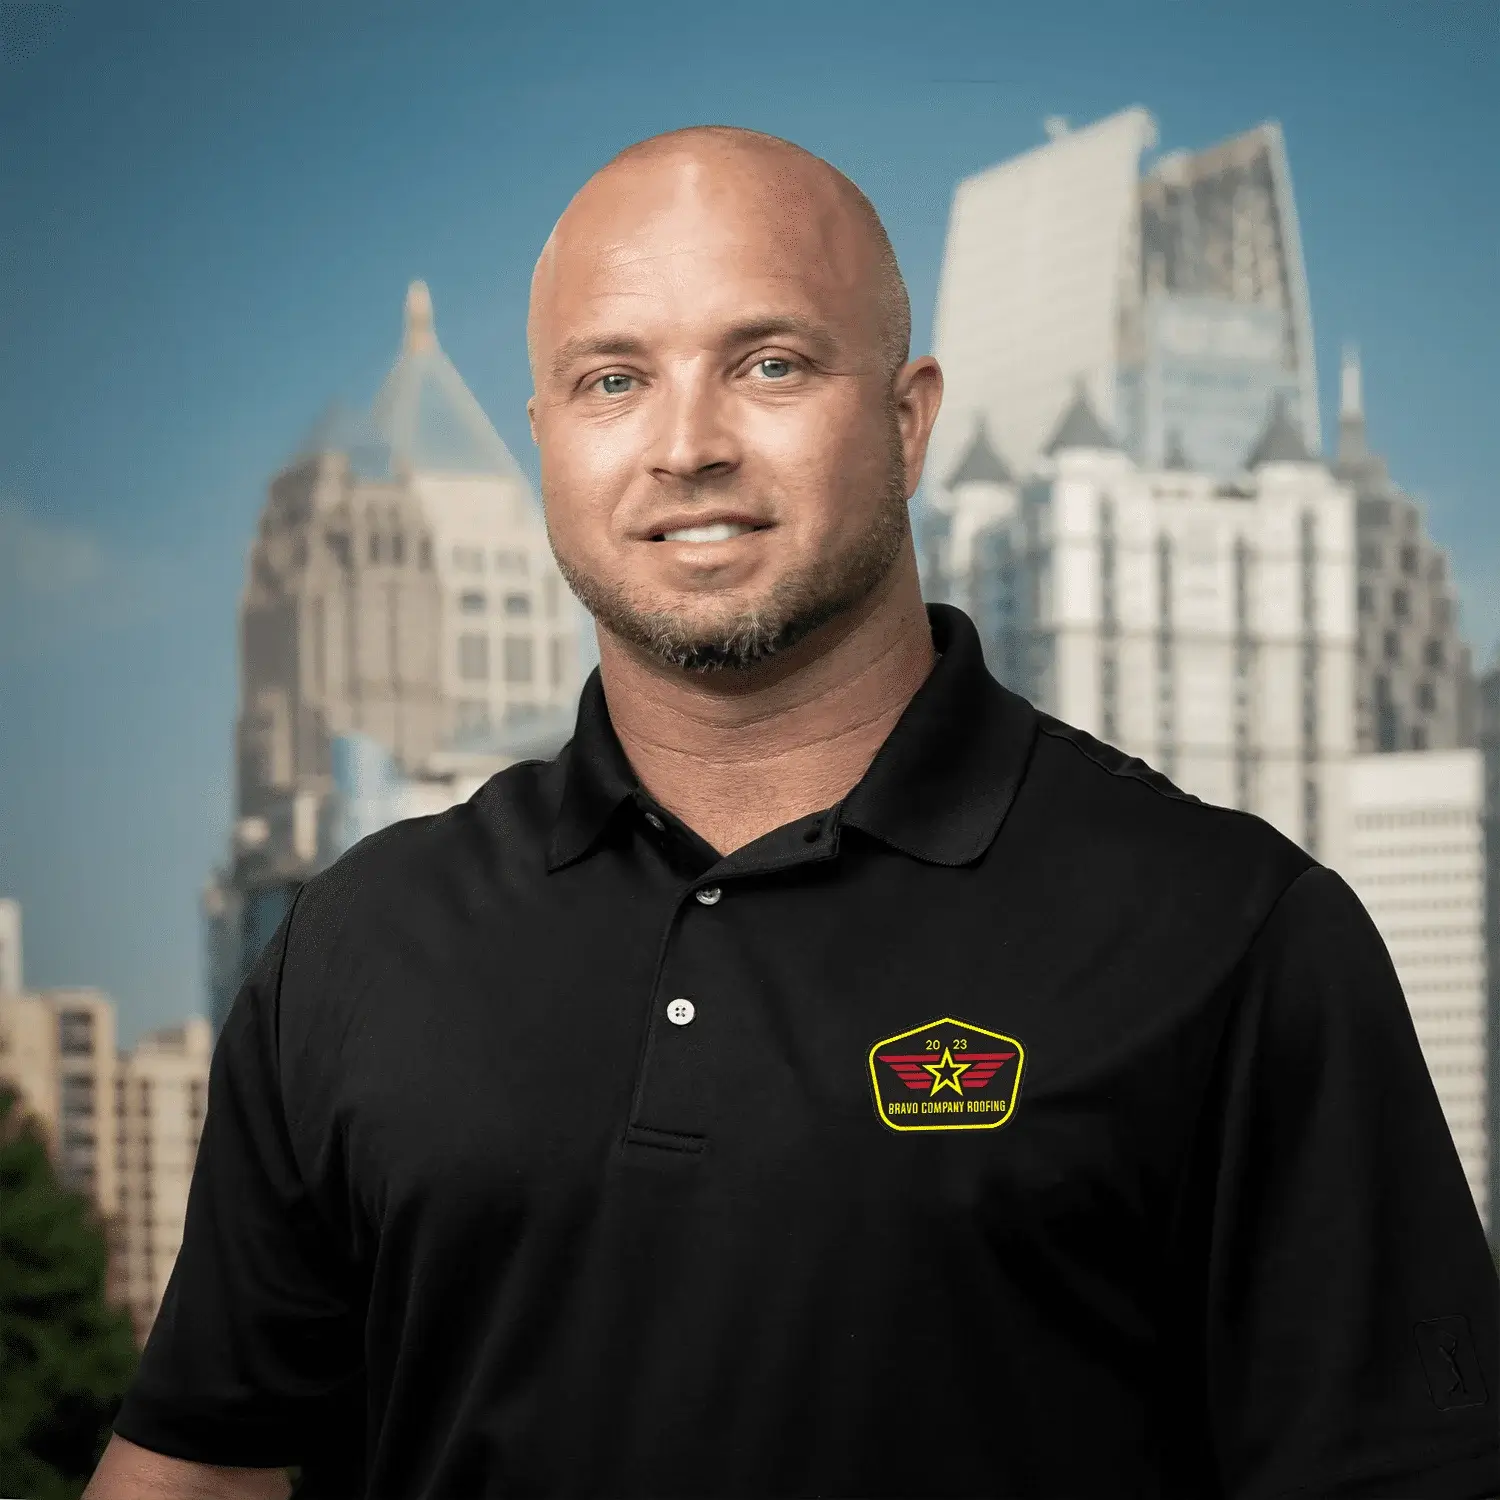 Jason Boyd the sales representative of Bravo Company Roofing | About Roofing Company in Atlanta, GA